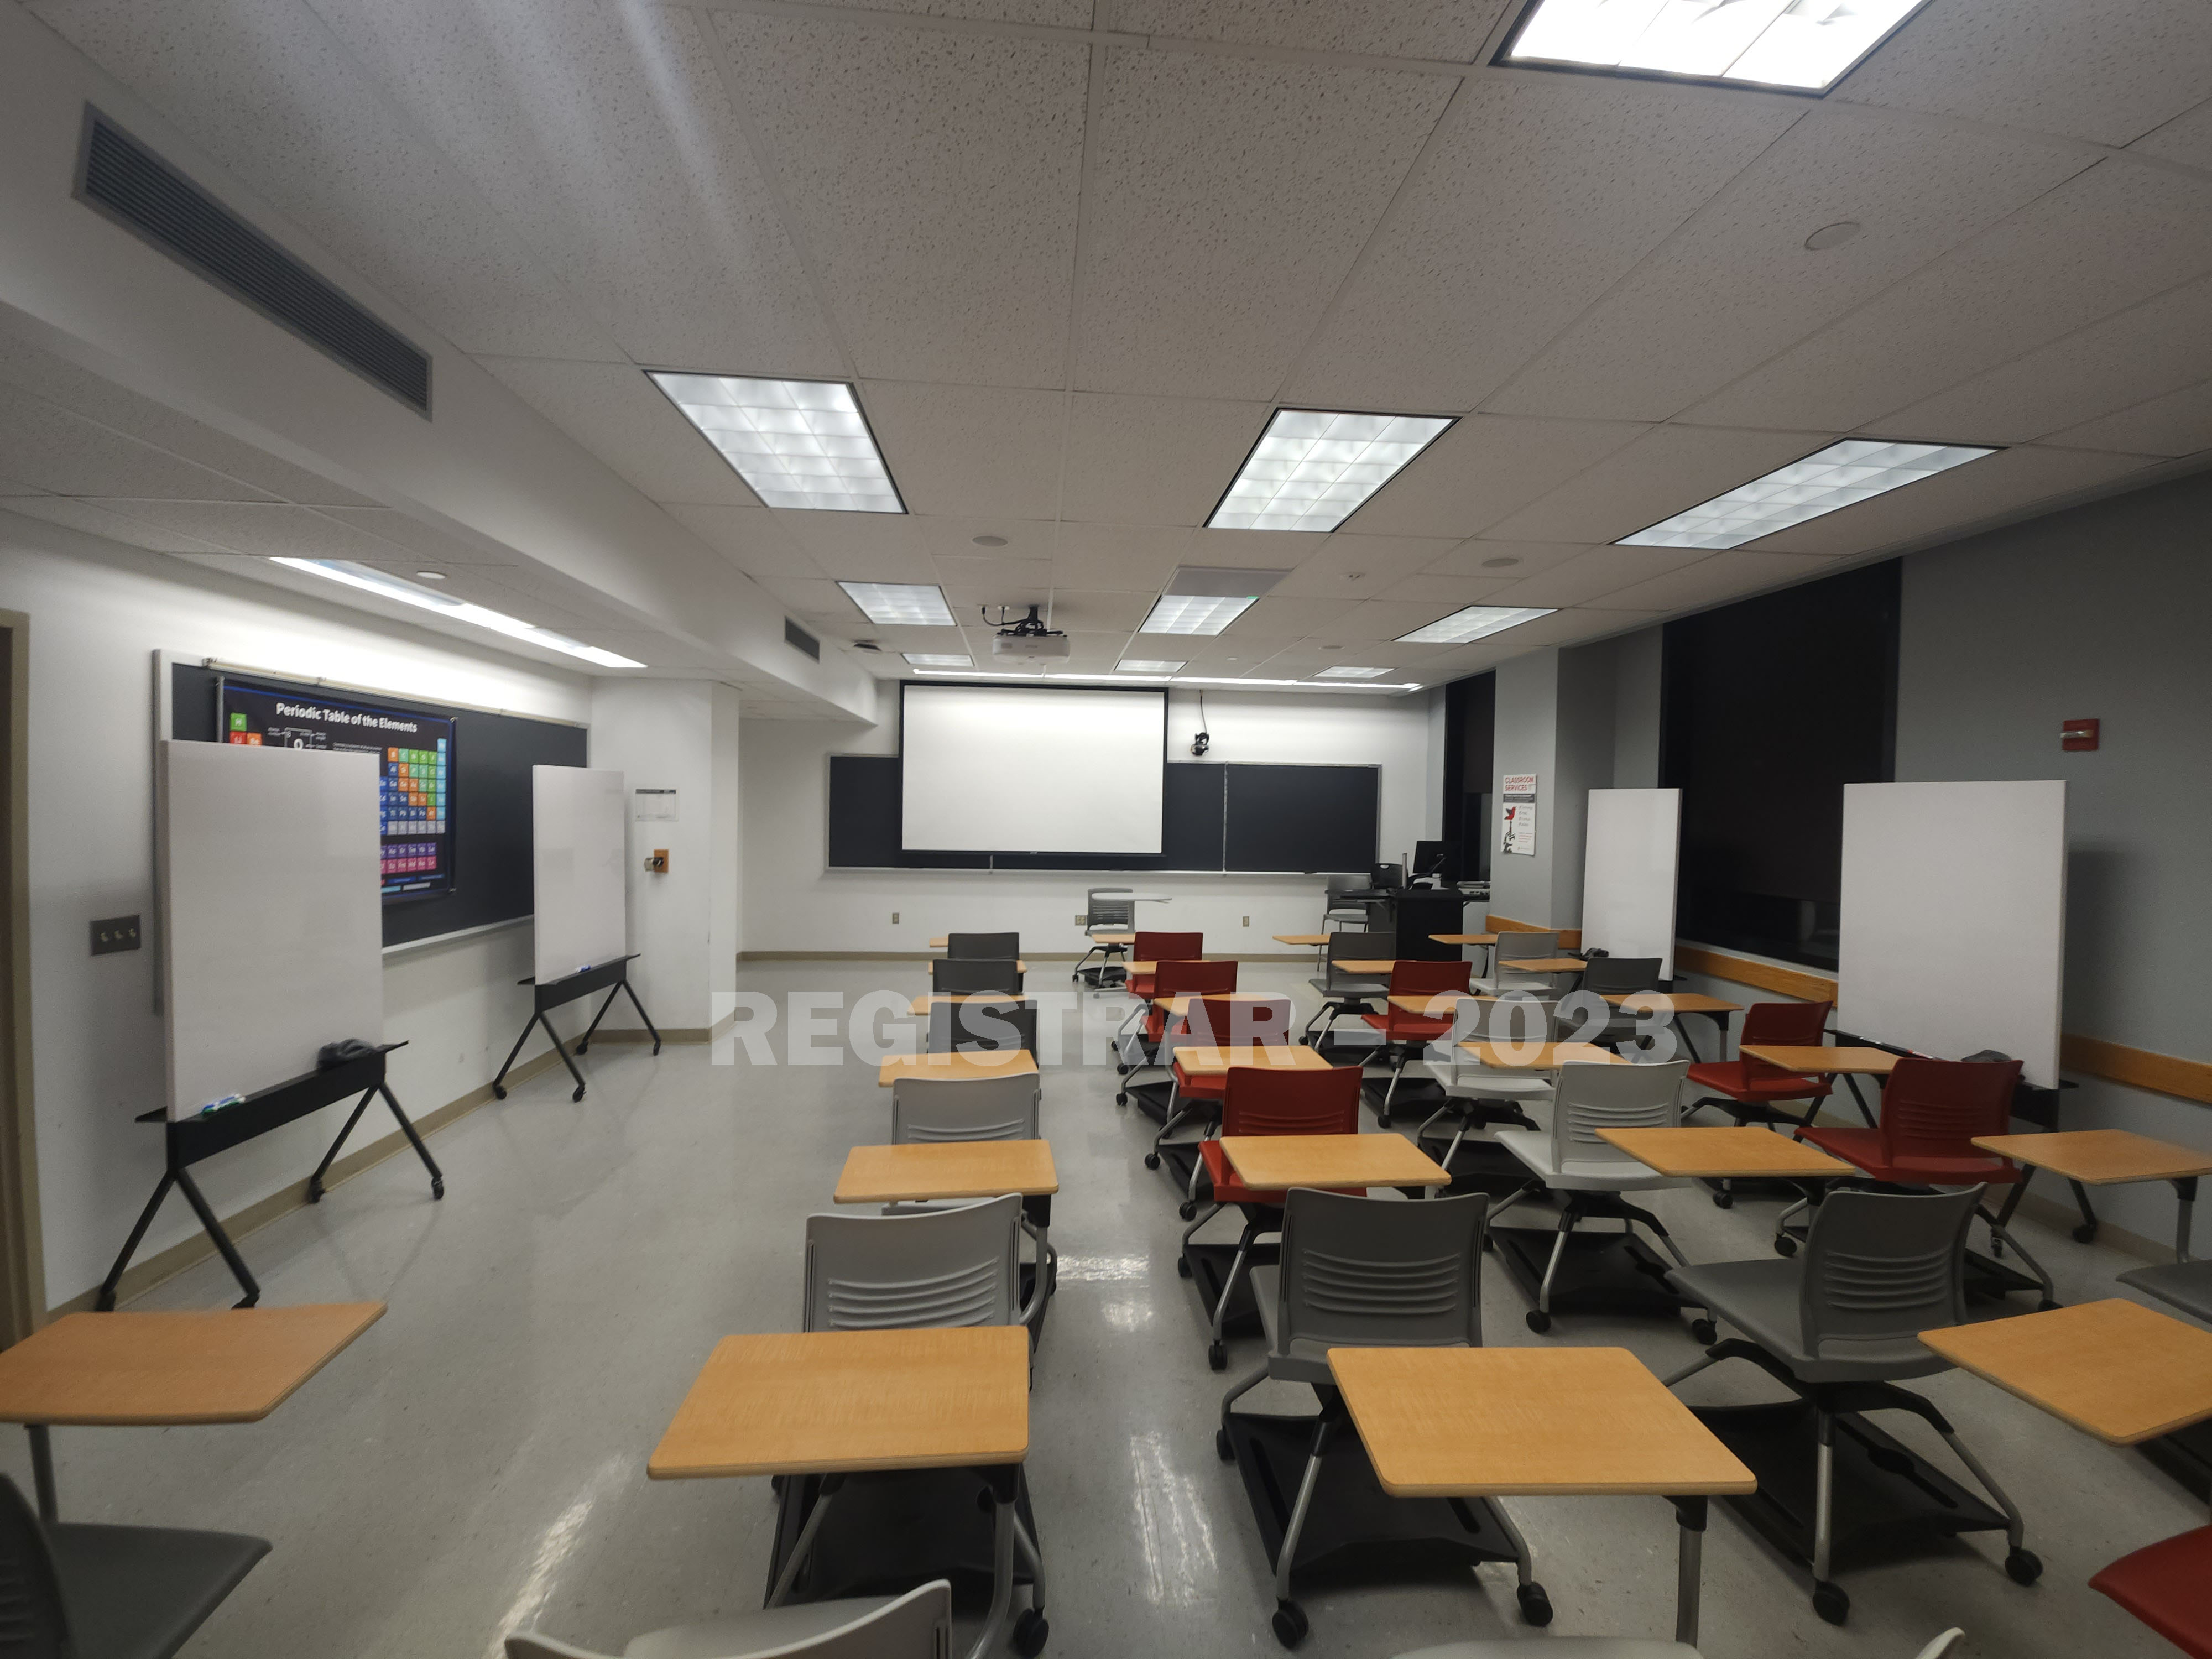 McPherson Chemical Lab room 1041 ultra wide view from the back of the room with projection screen down